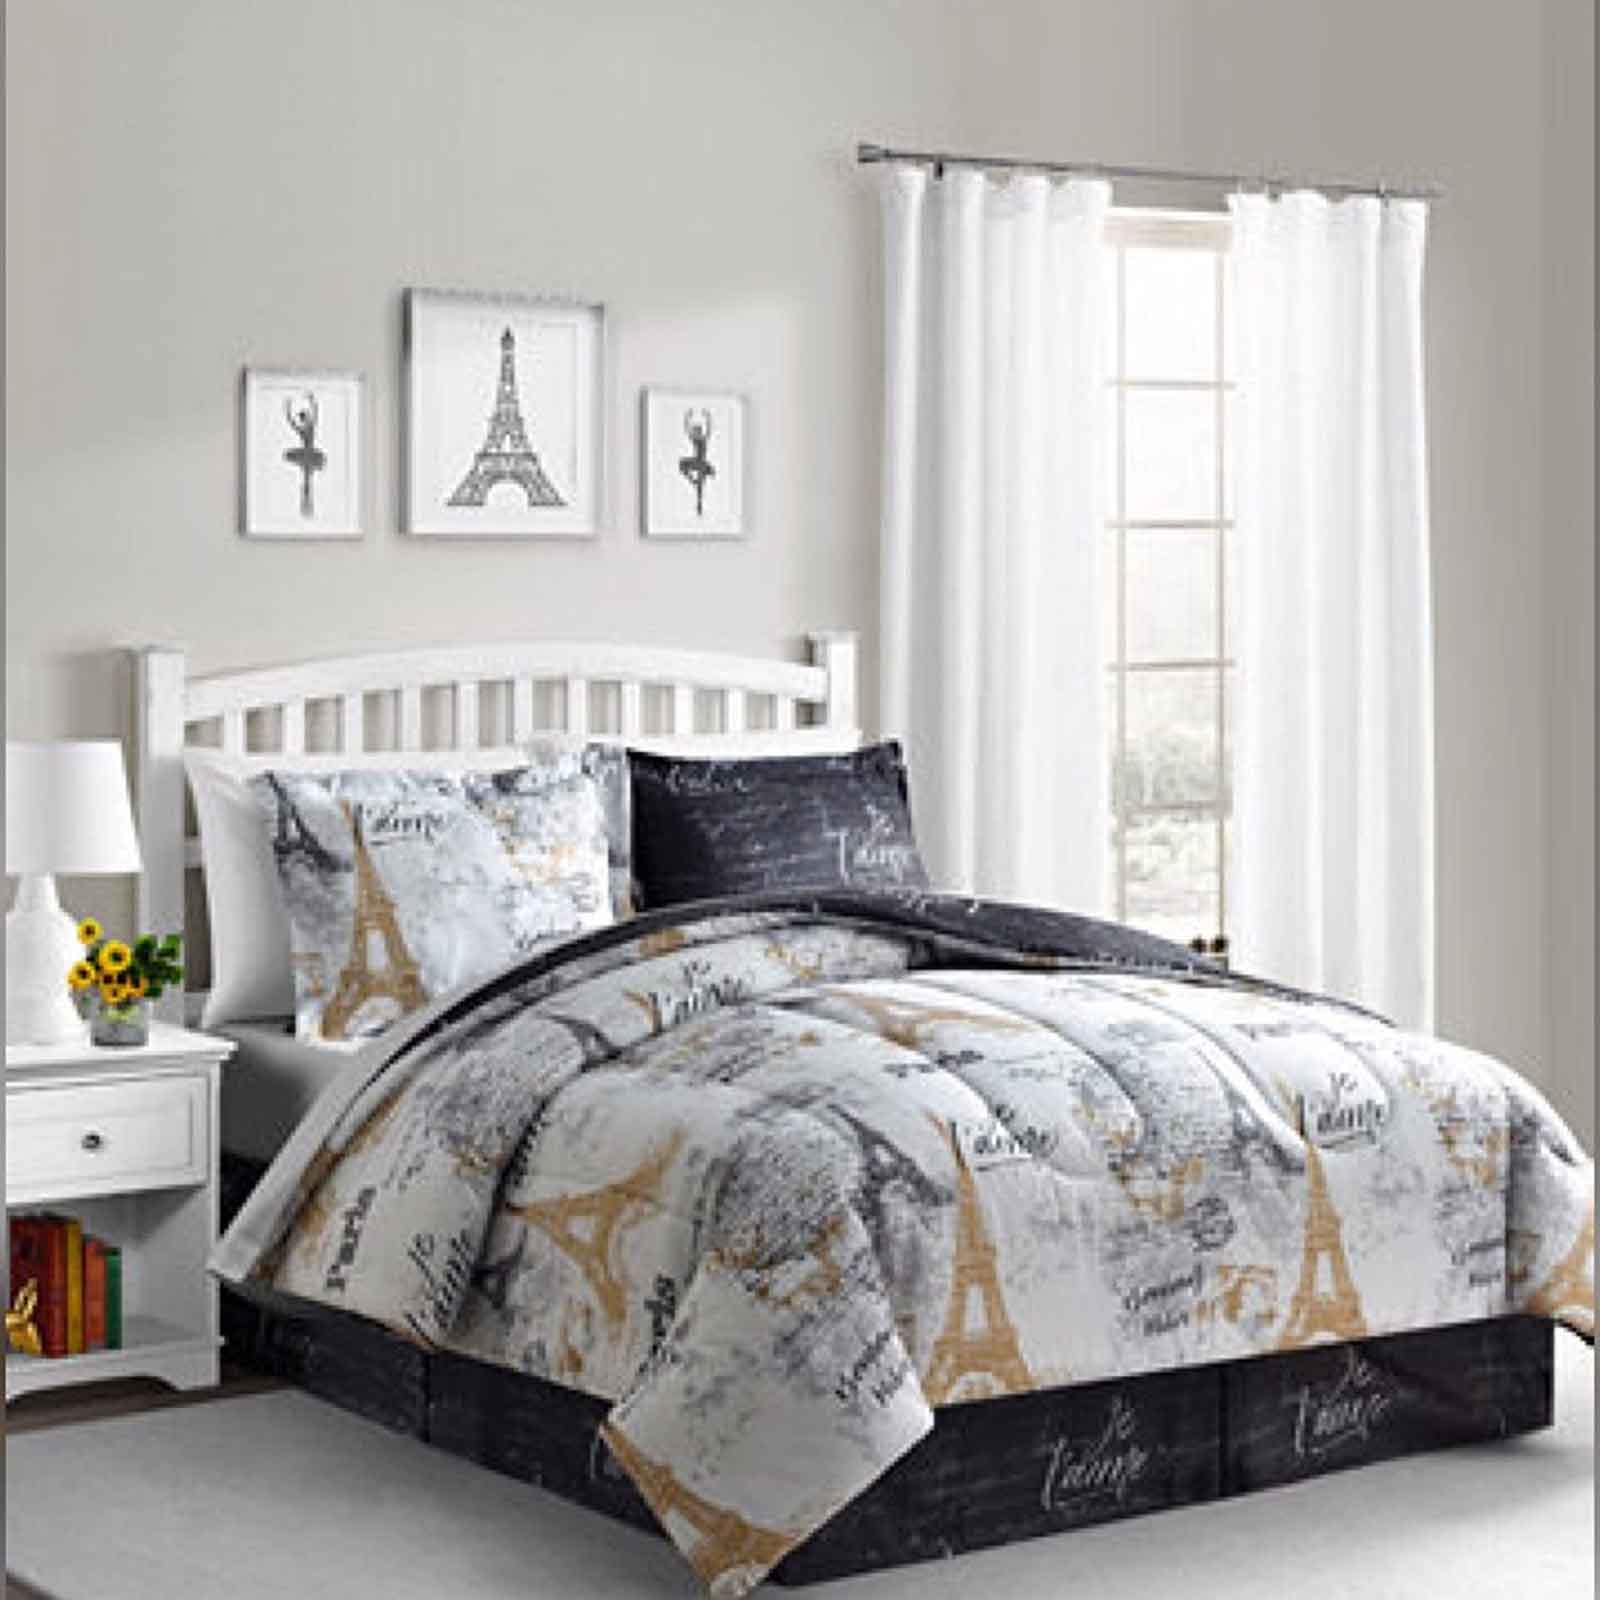 Bon Jour 8pc Reversible King Comforter, Sears Bed In A Bag King